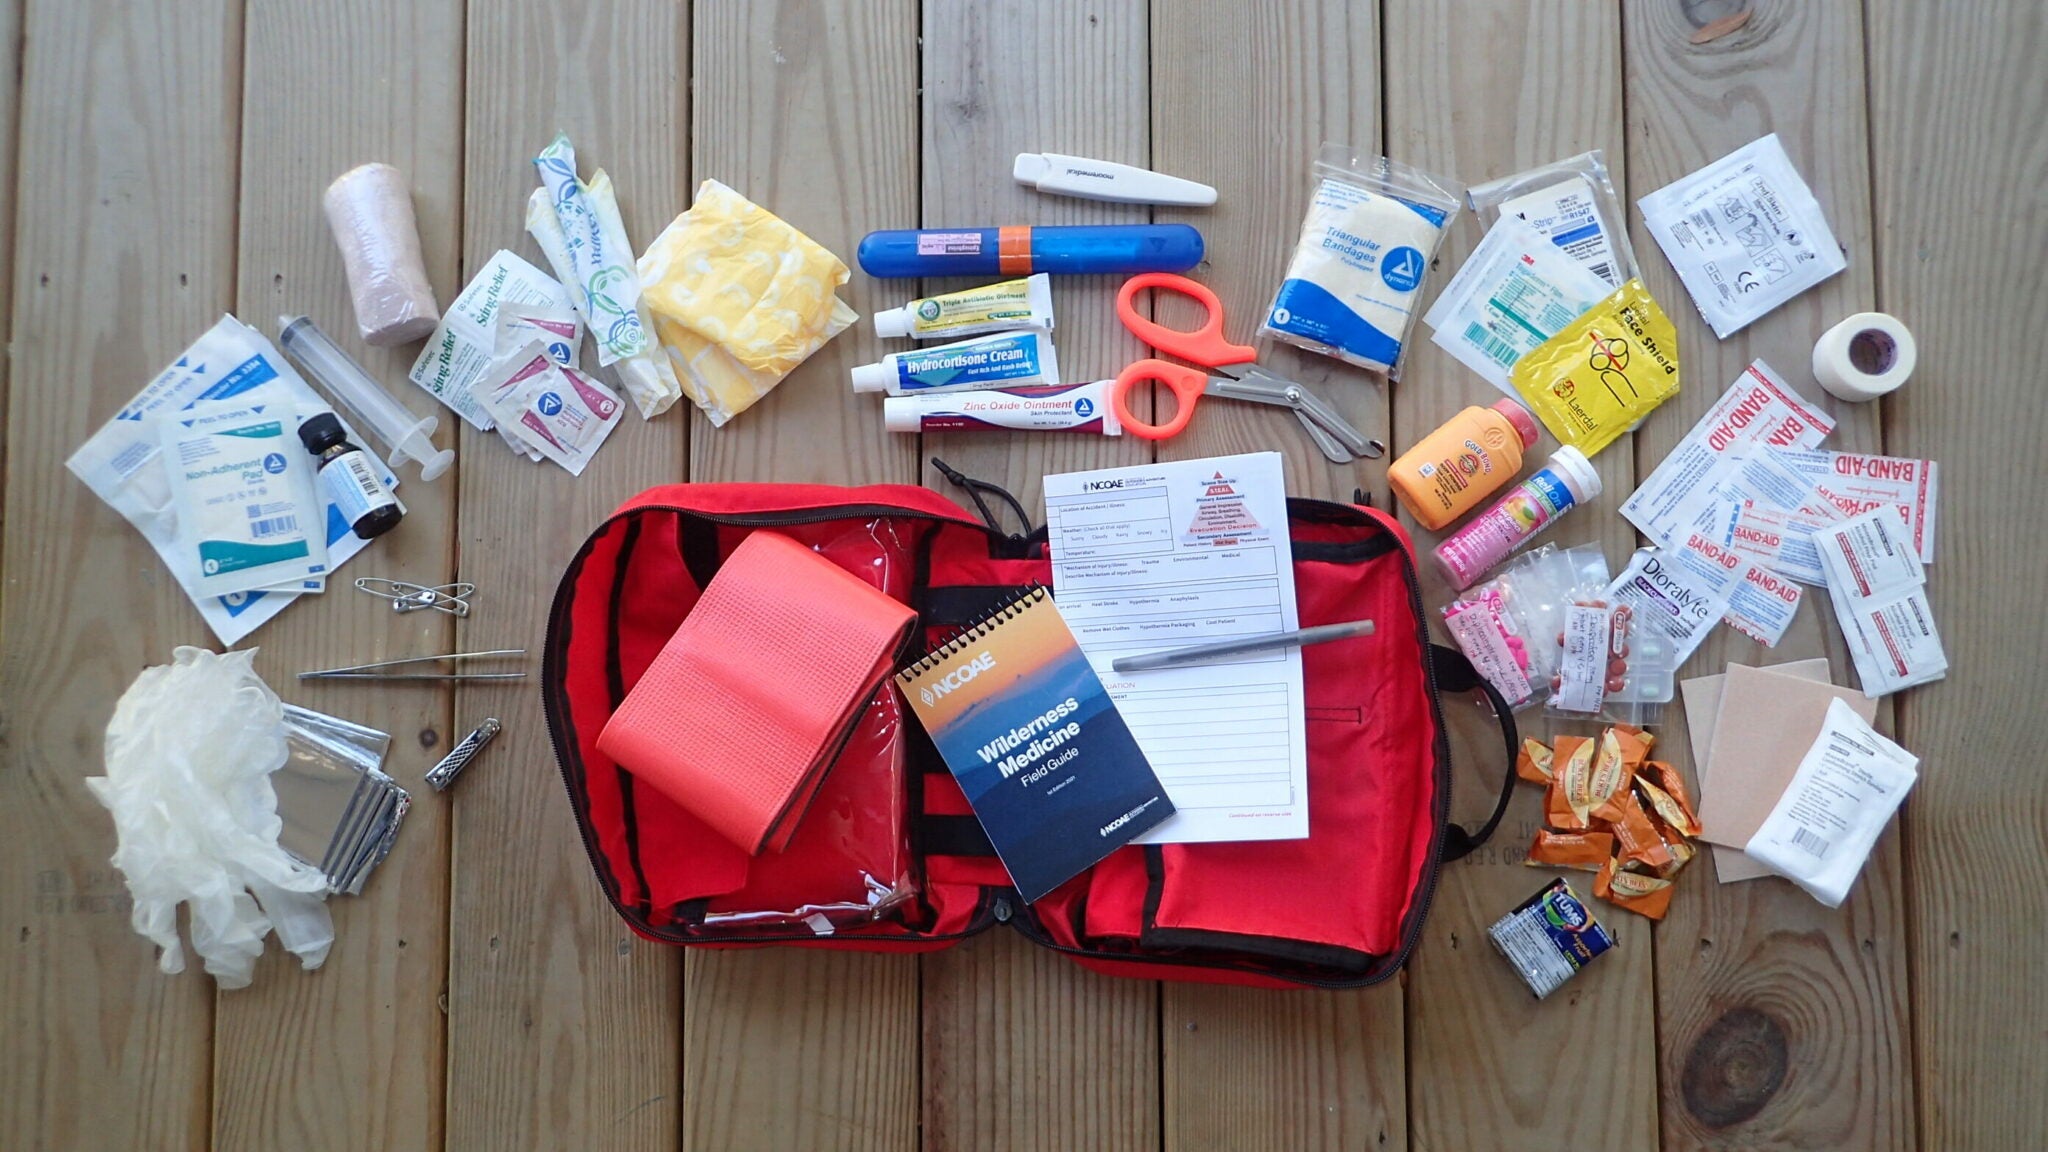 Safety First: Carry a First Aid Kit